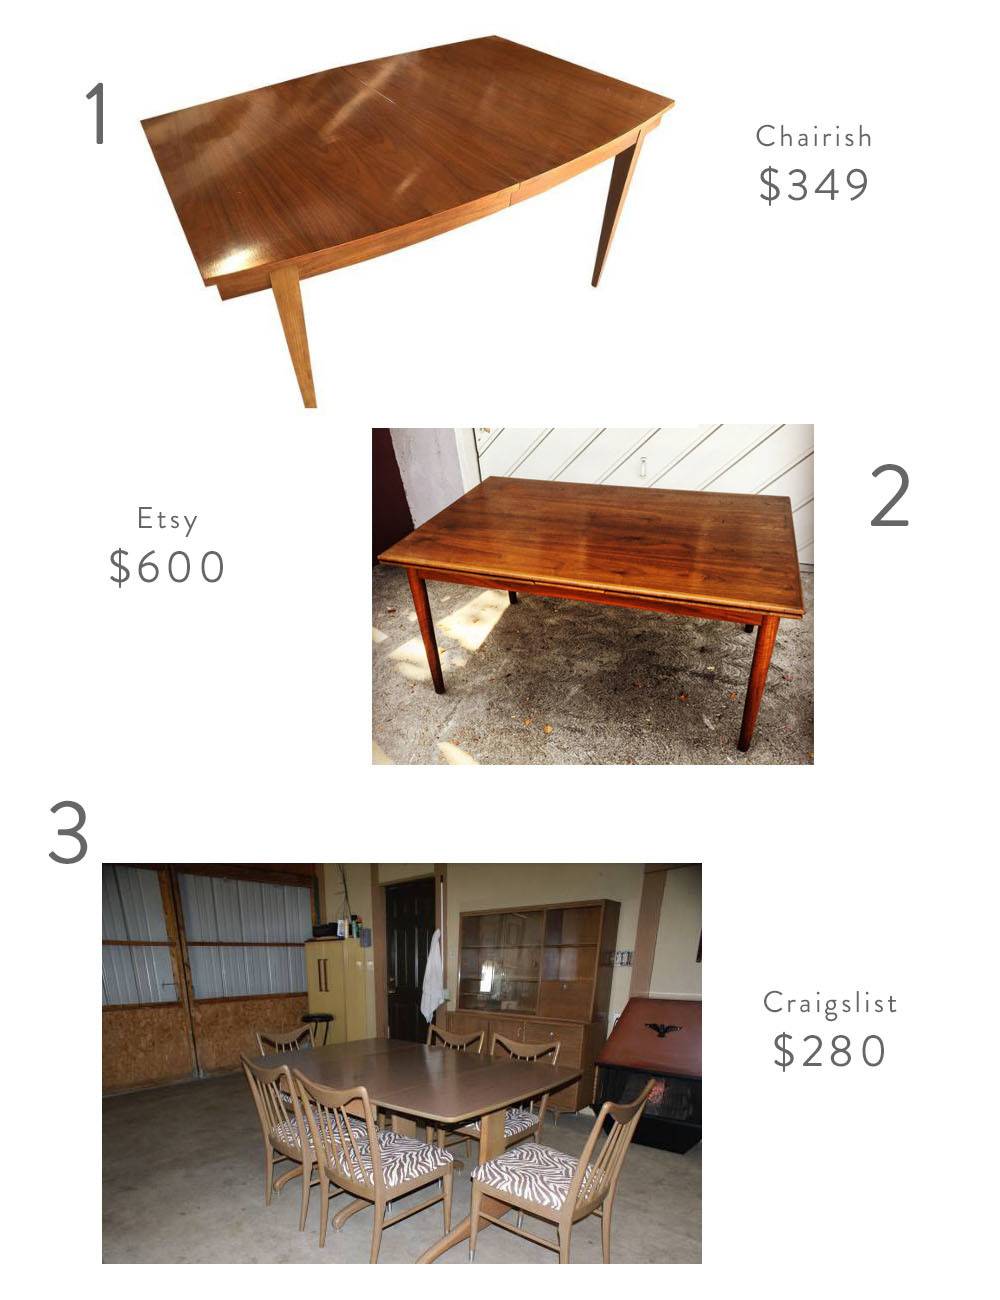 Shopping Guide: Mid Century Furniture and Acessories